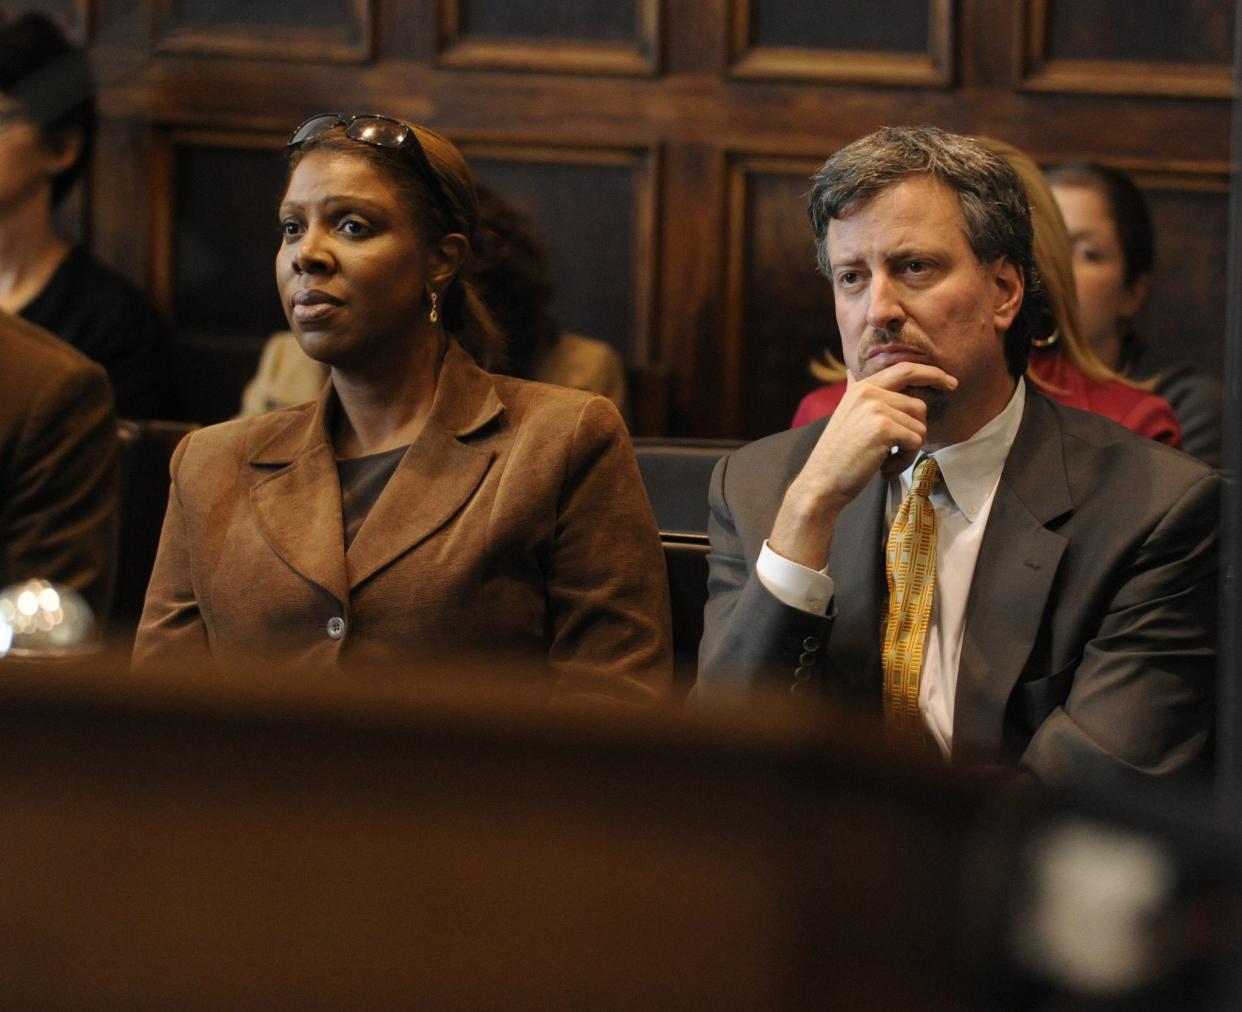 A lawsuit was filed in Manhattan Supreme Court on October 22, 2008 by City Council members Letitia James (l.) and Bill De Blasio (r.) to block tomorrow's proposed City Council vote that could alter the current term limits for elected officials, including then-Mayor Bloomberg.